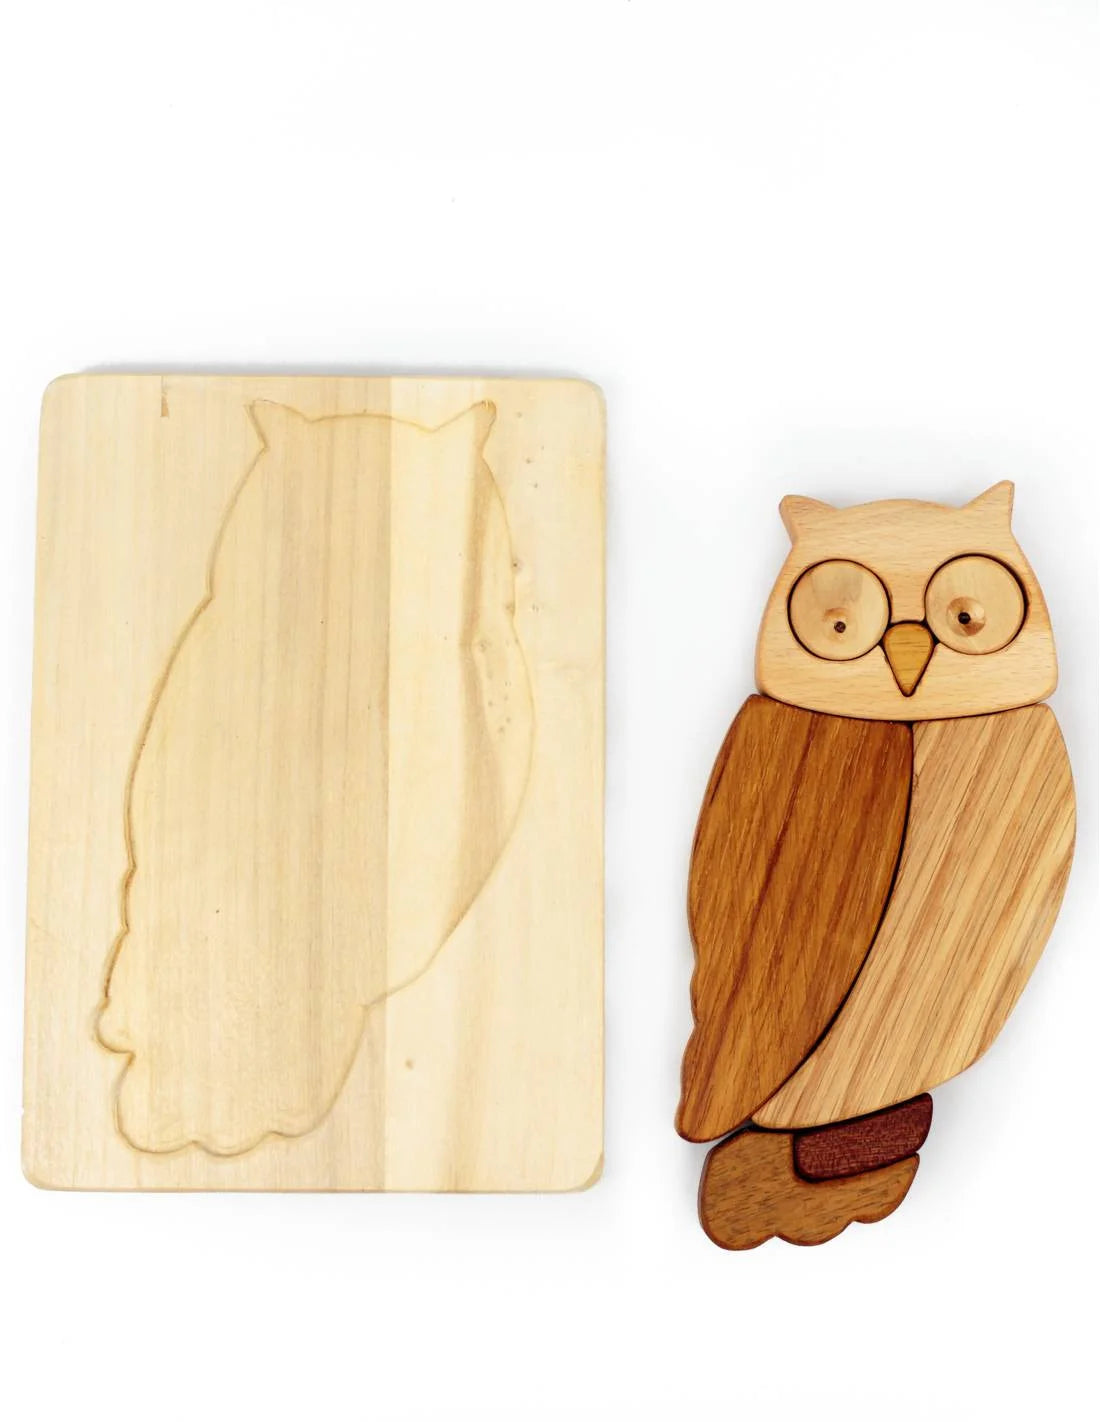 Natural Wood Owl Puzzle